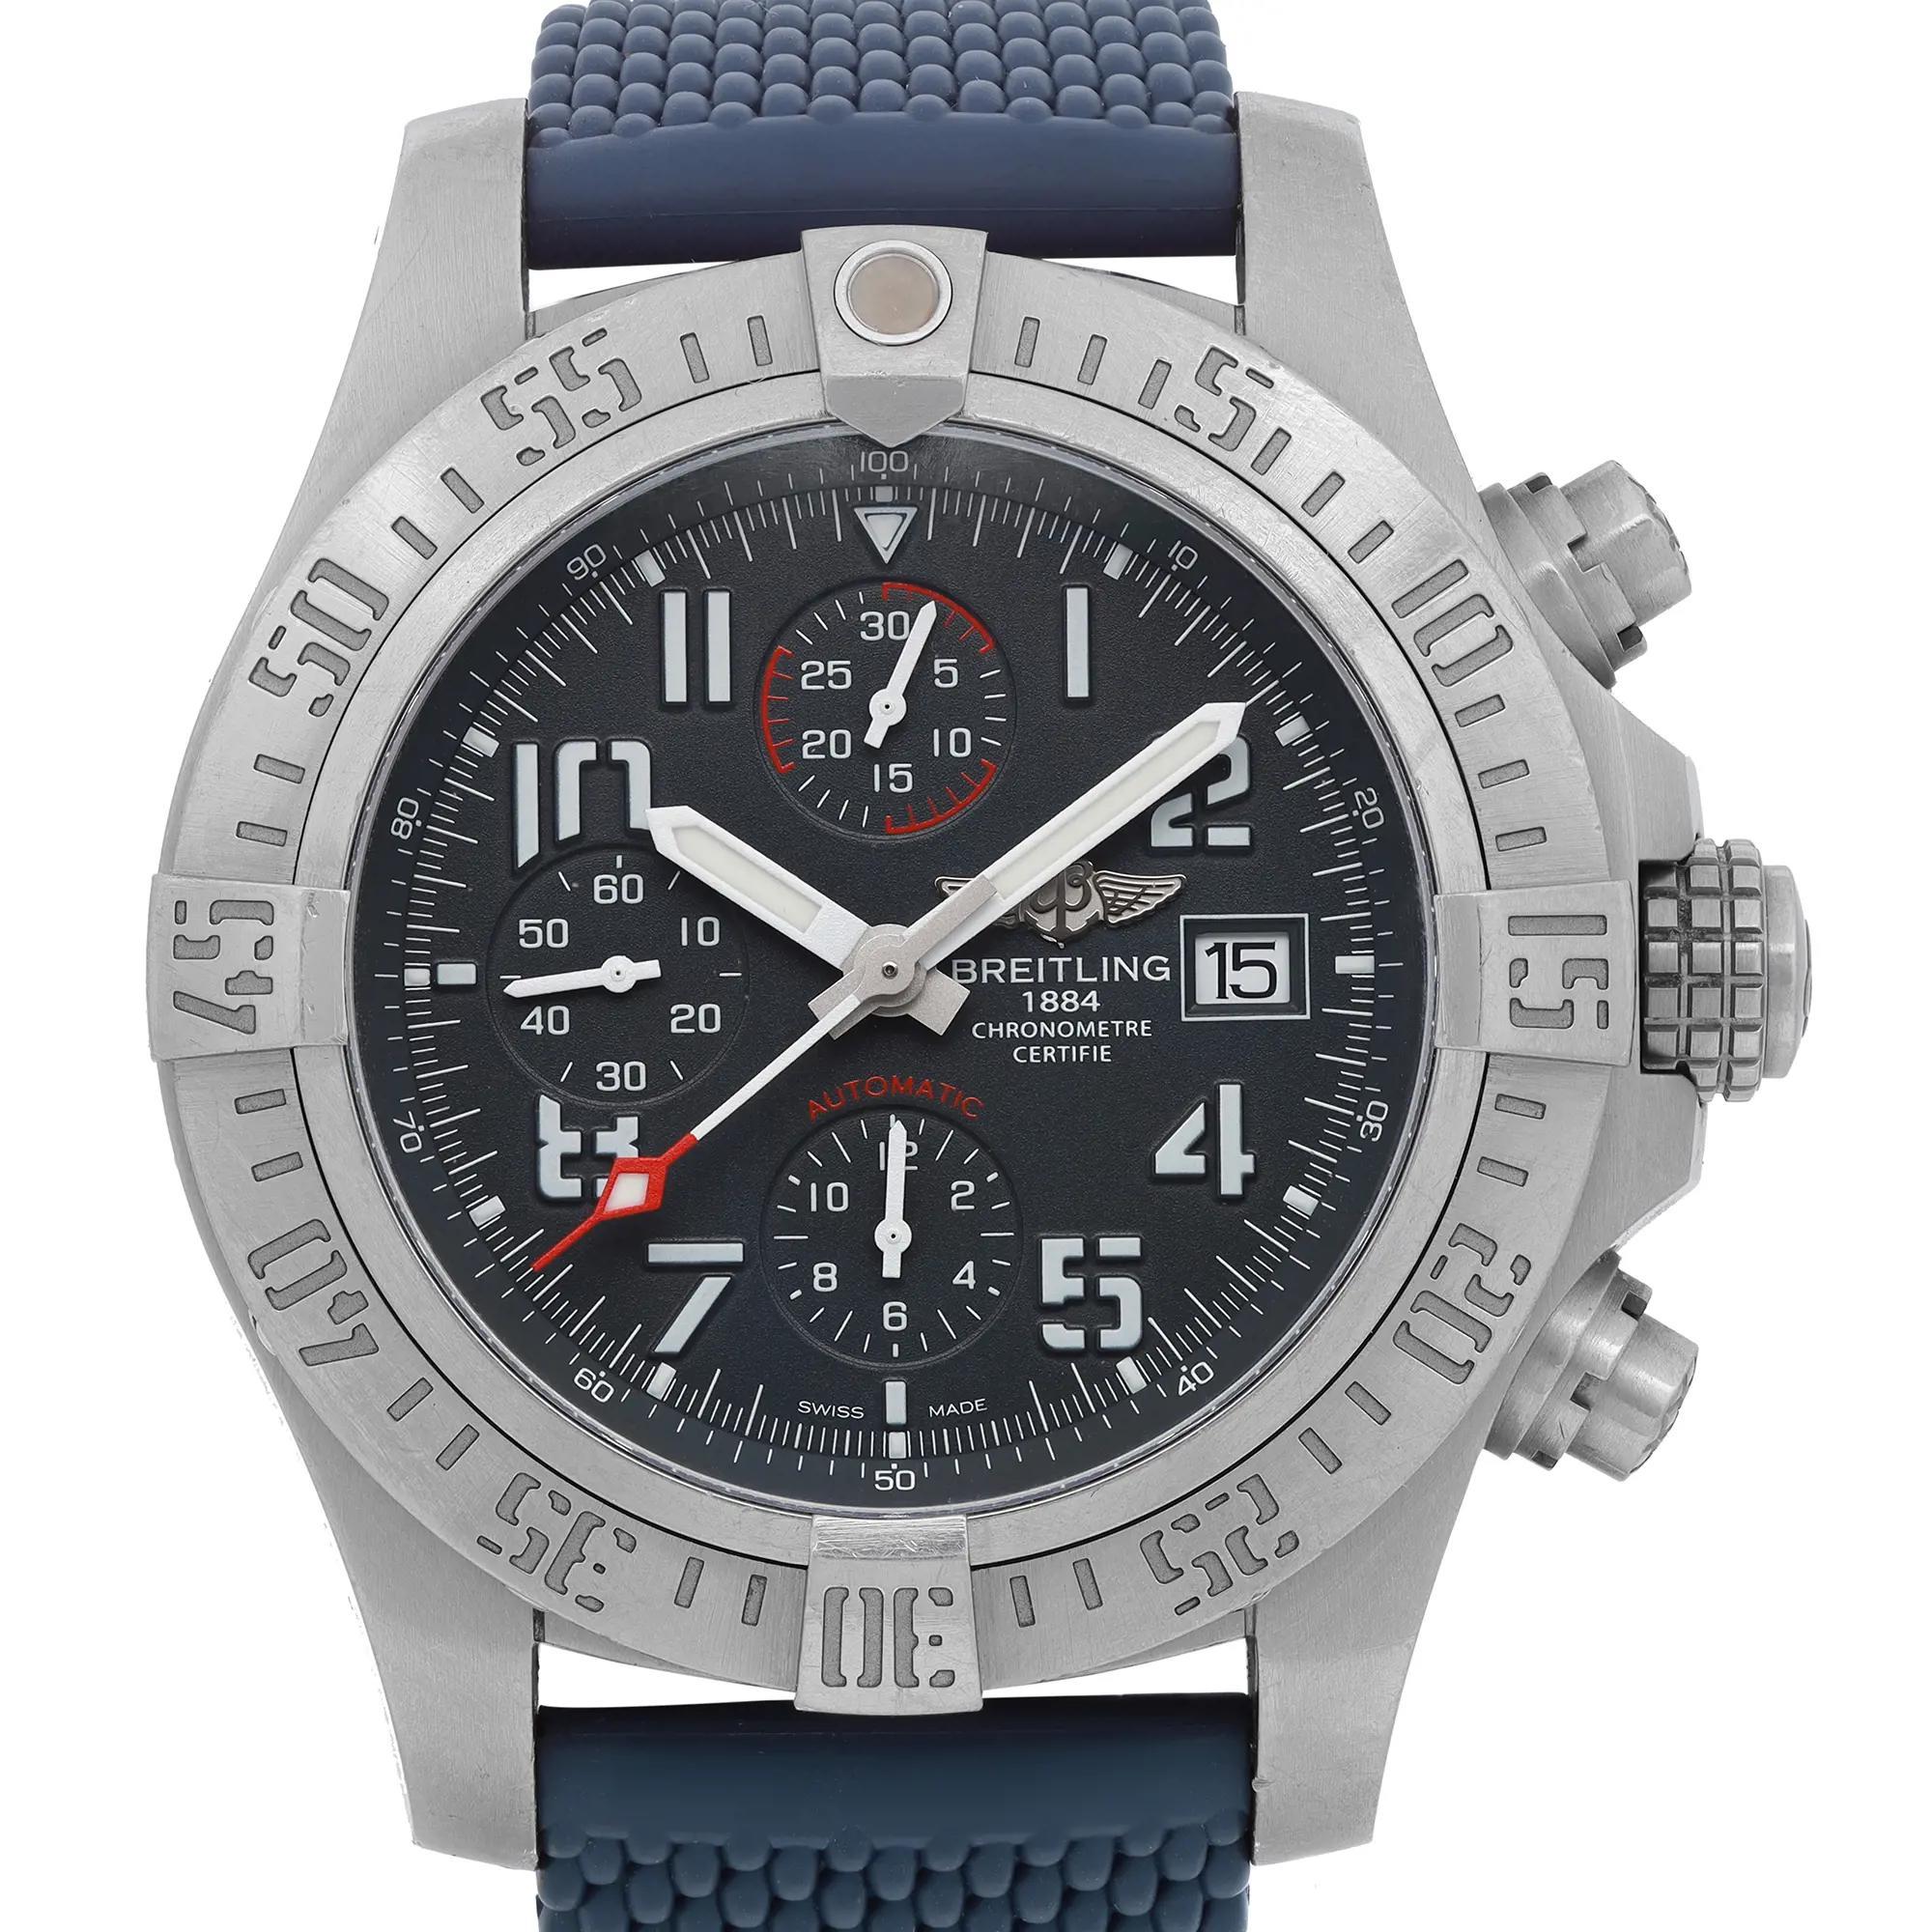 Pre-owned and in good condition. Can have minor blemishes during handling. Recently polished. Original Breitling band but not related to this model. 

Brand: Breitling  Type: Wristwatch  Department: Men  Model Number: E1338310/M536  Country/Region